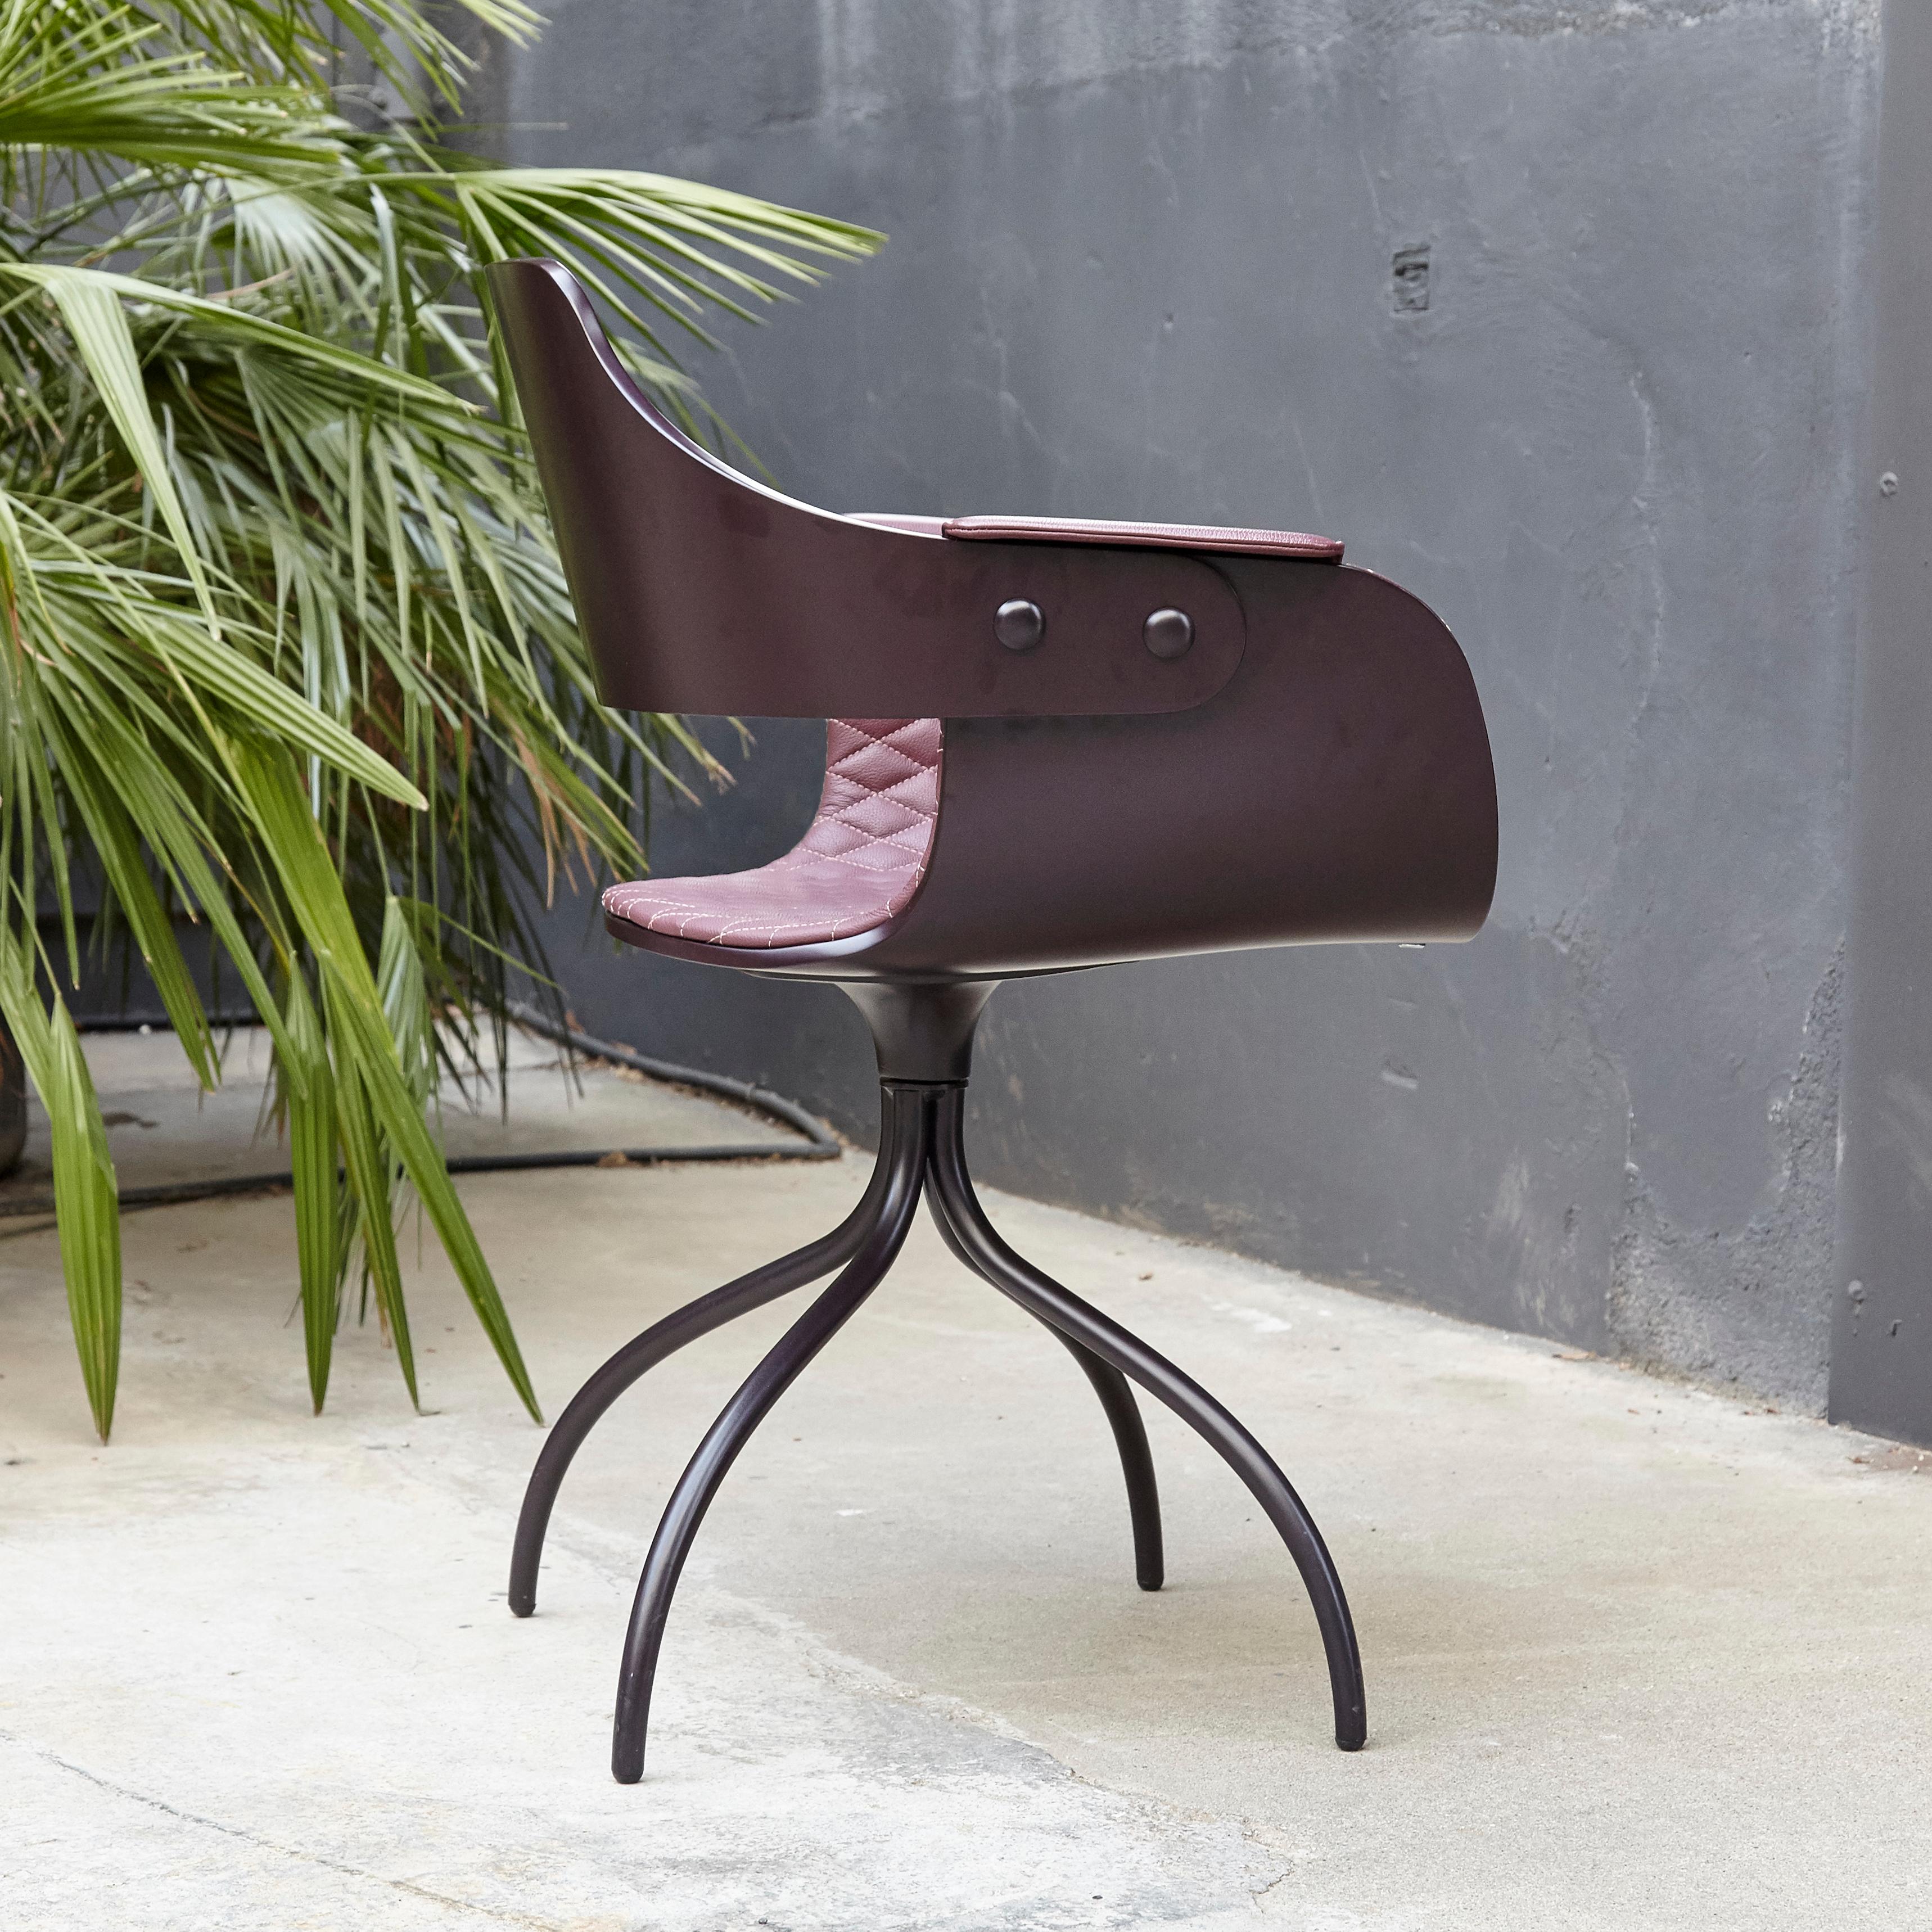 Steel Jaime Hayon, Contemporary Upholstered Purple Wood Chair Showtime by BD Barcelona